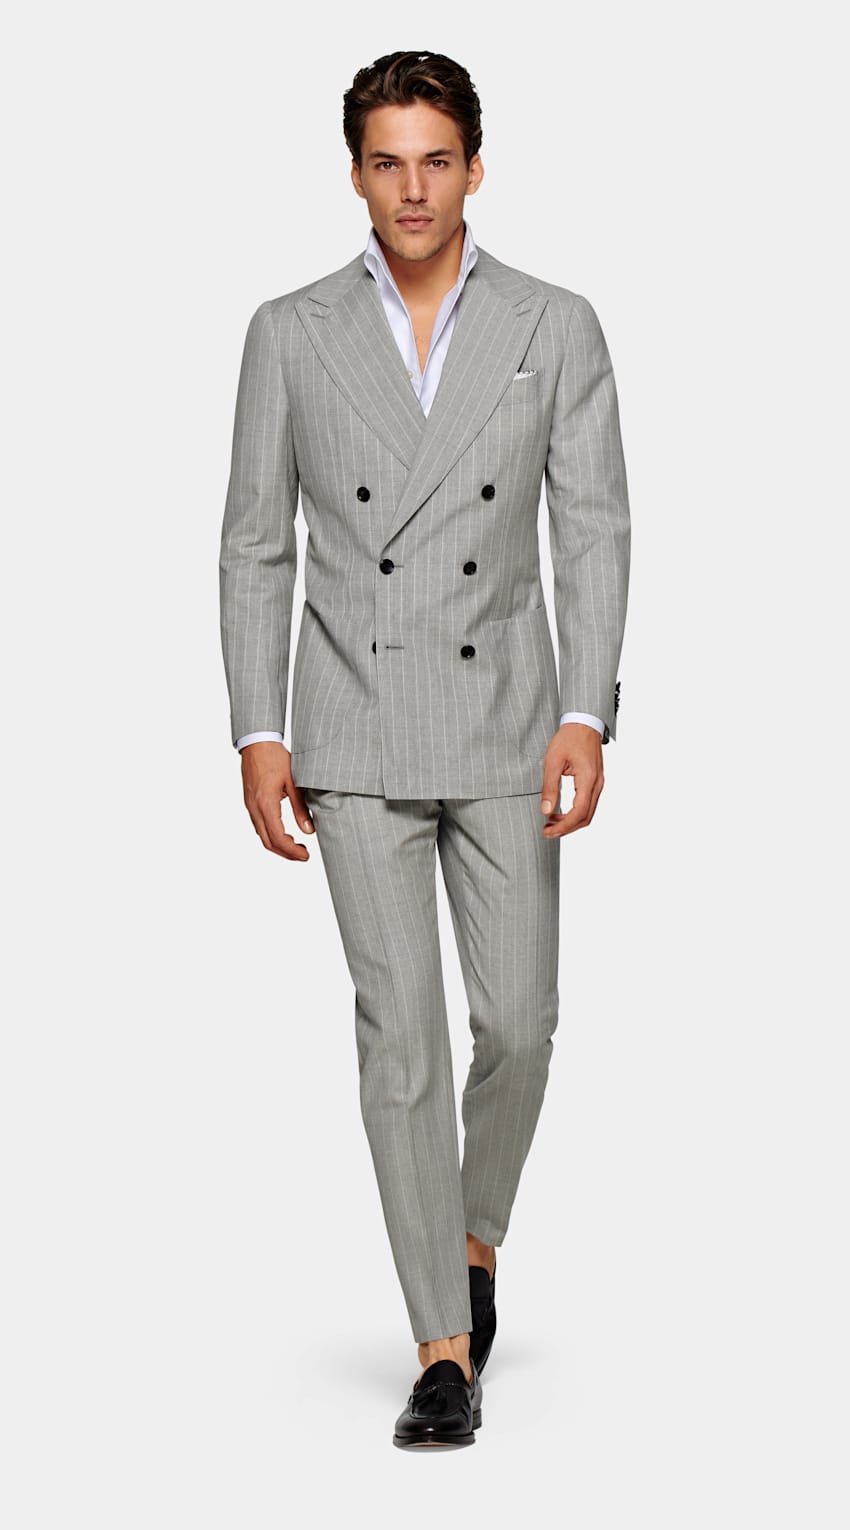 SUITSUPPLY Pure S130's Wool by E.Thomas, Italy Light Grey Striped Havana Suit